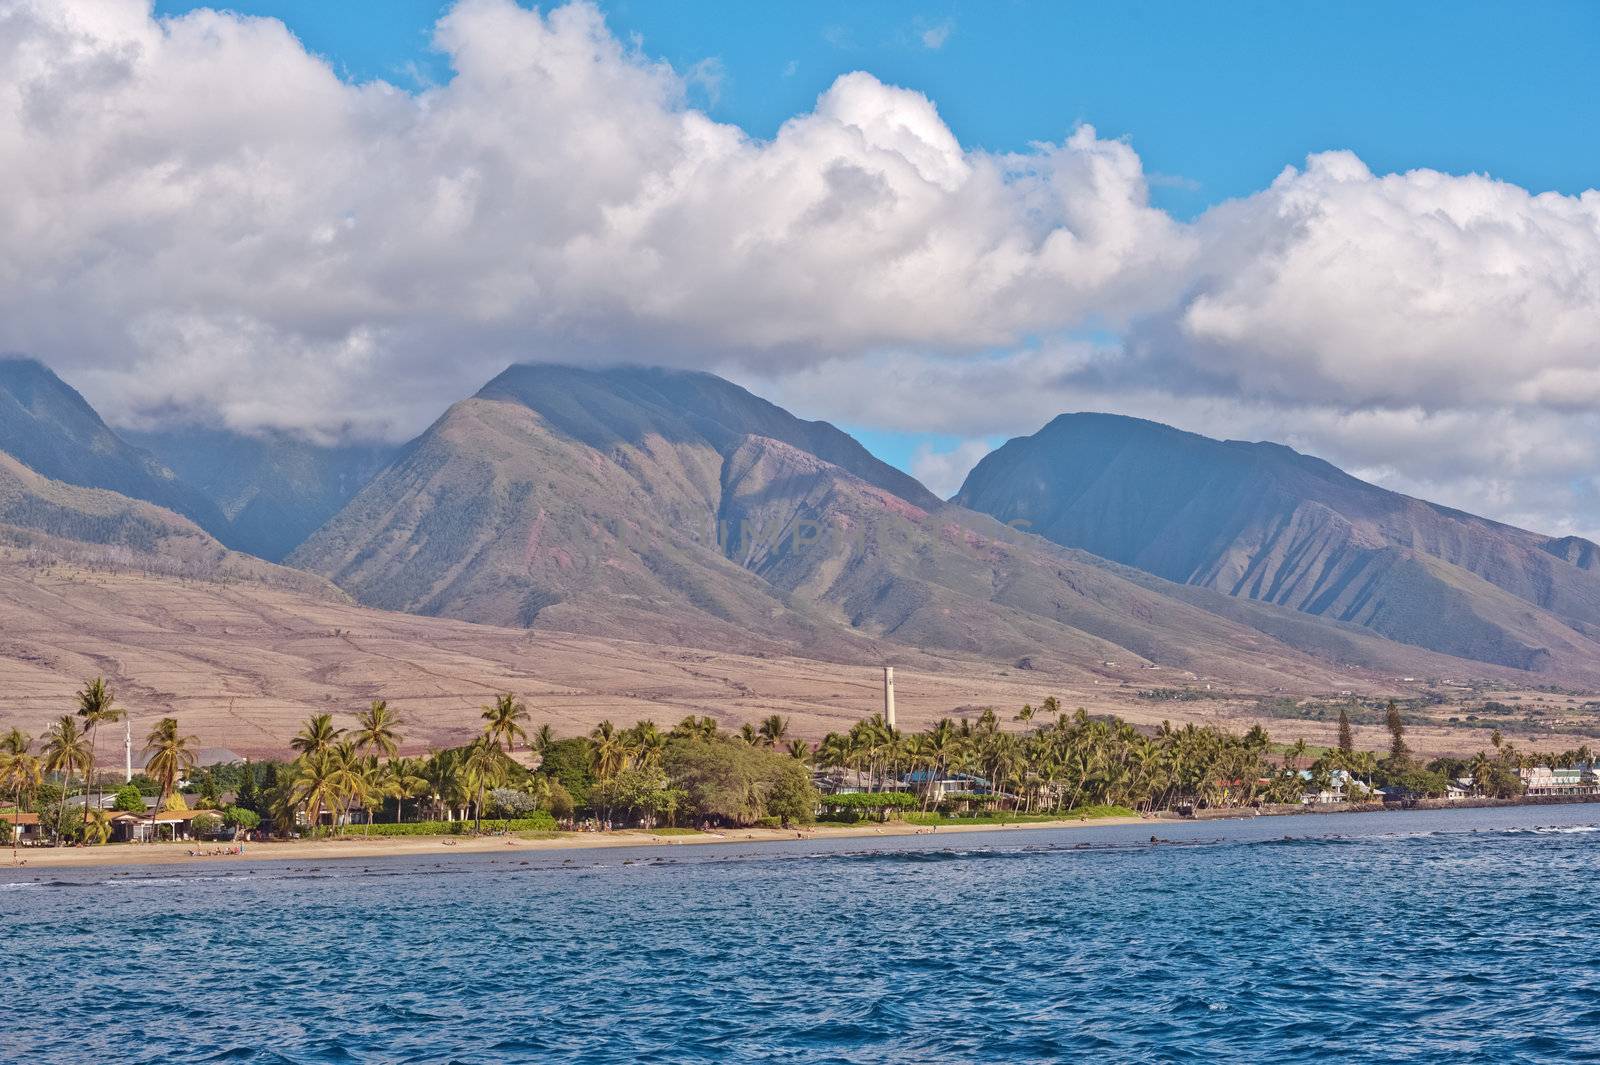 Maui Shore by Marcus